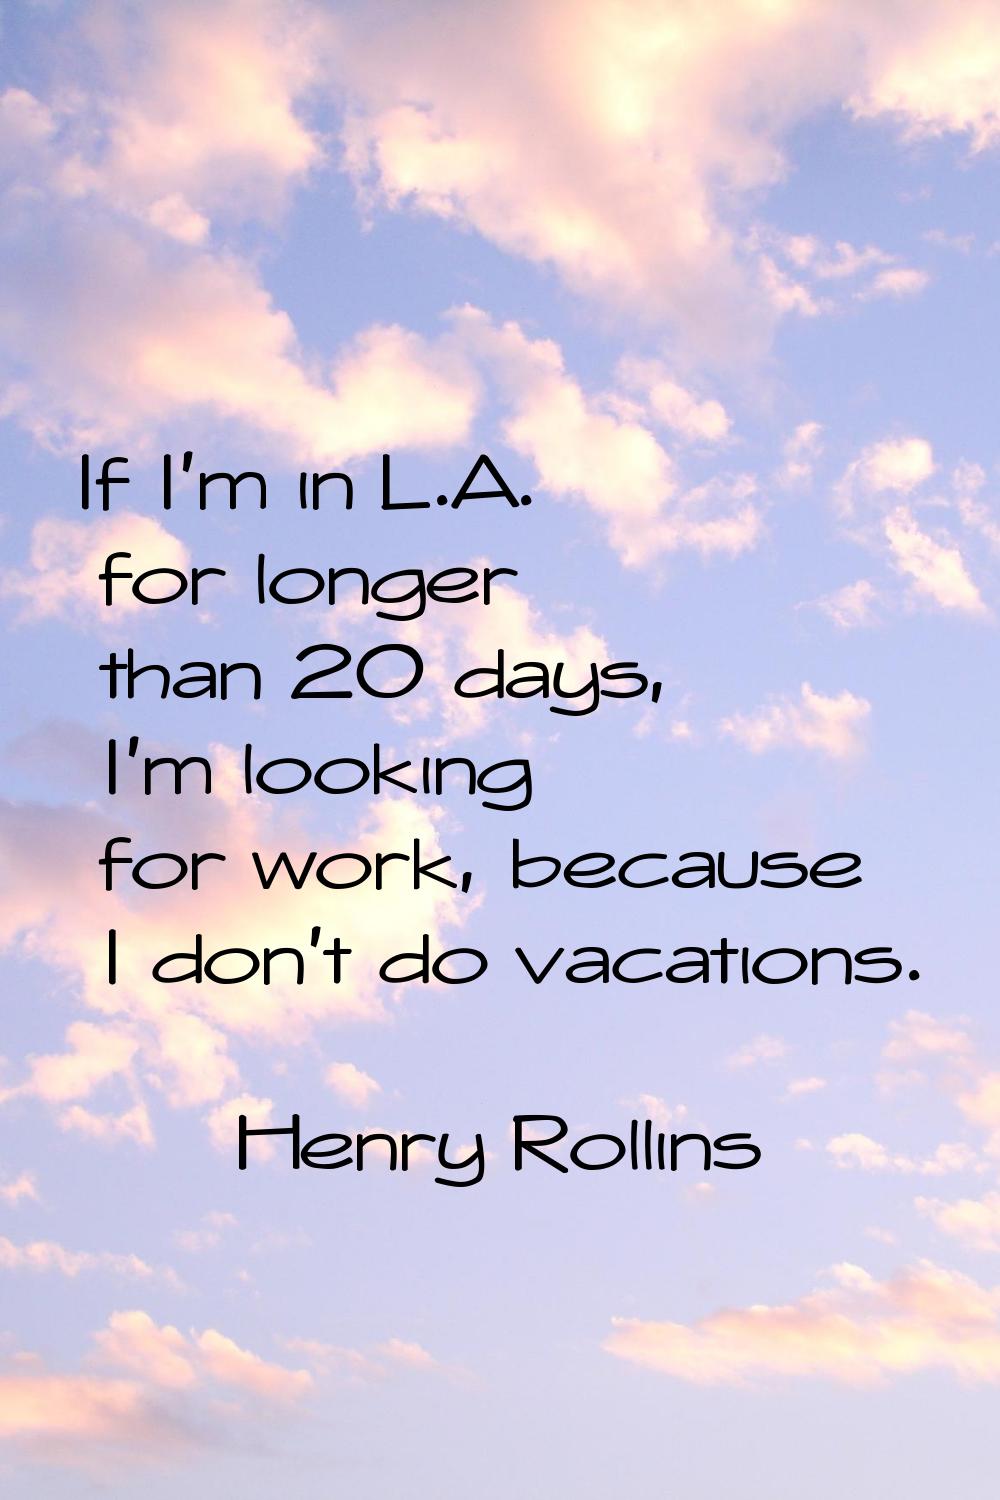 If I'm in L.A. for longer than 20 days, I'm looking for work, because I don't do vacations.